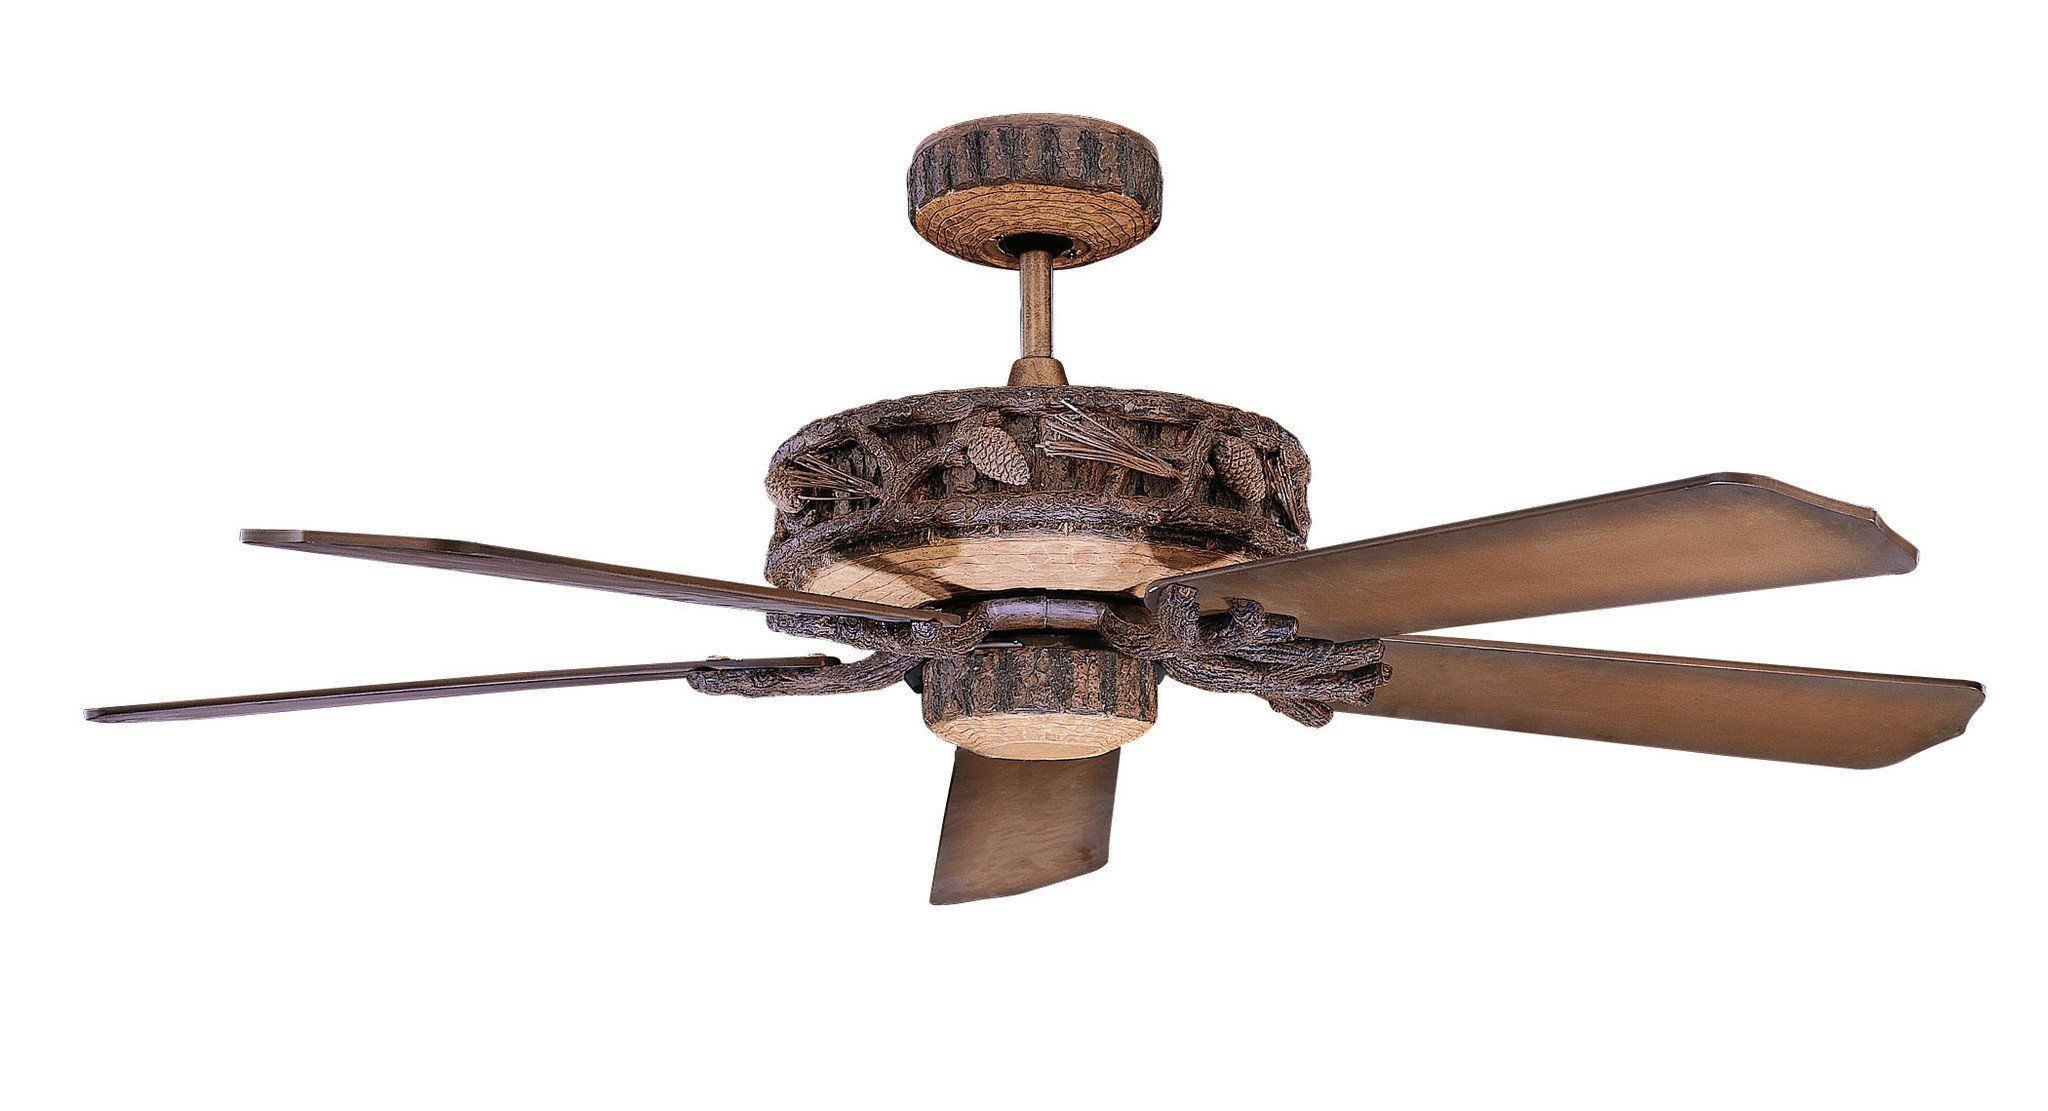 52" PONDEROSA Ceiling Fan for Wet Location - Old World Leather Fans Concord Fans 